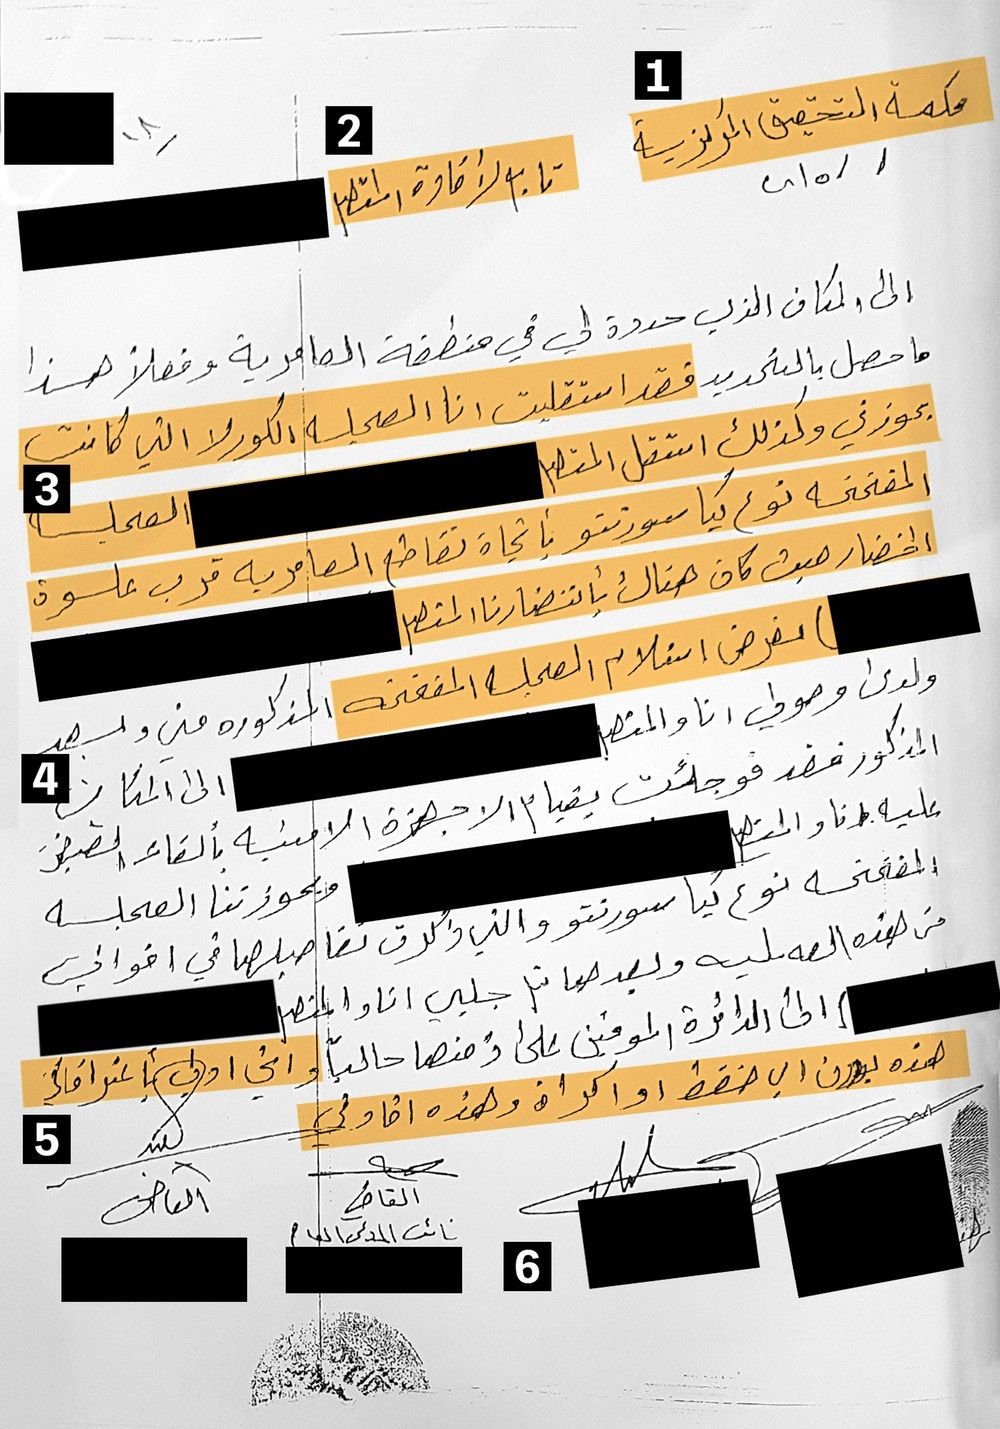 An excerpt from Ahmed’s 18-page, handwritten confession. His family asserts that the handwriting isn’t his, and that he was forced to sign and fingerprint the document after enduring severe torture. Image provided by The Intercept, 2018.